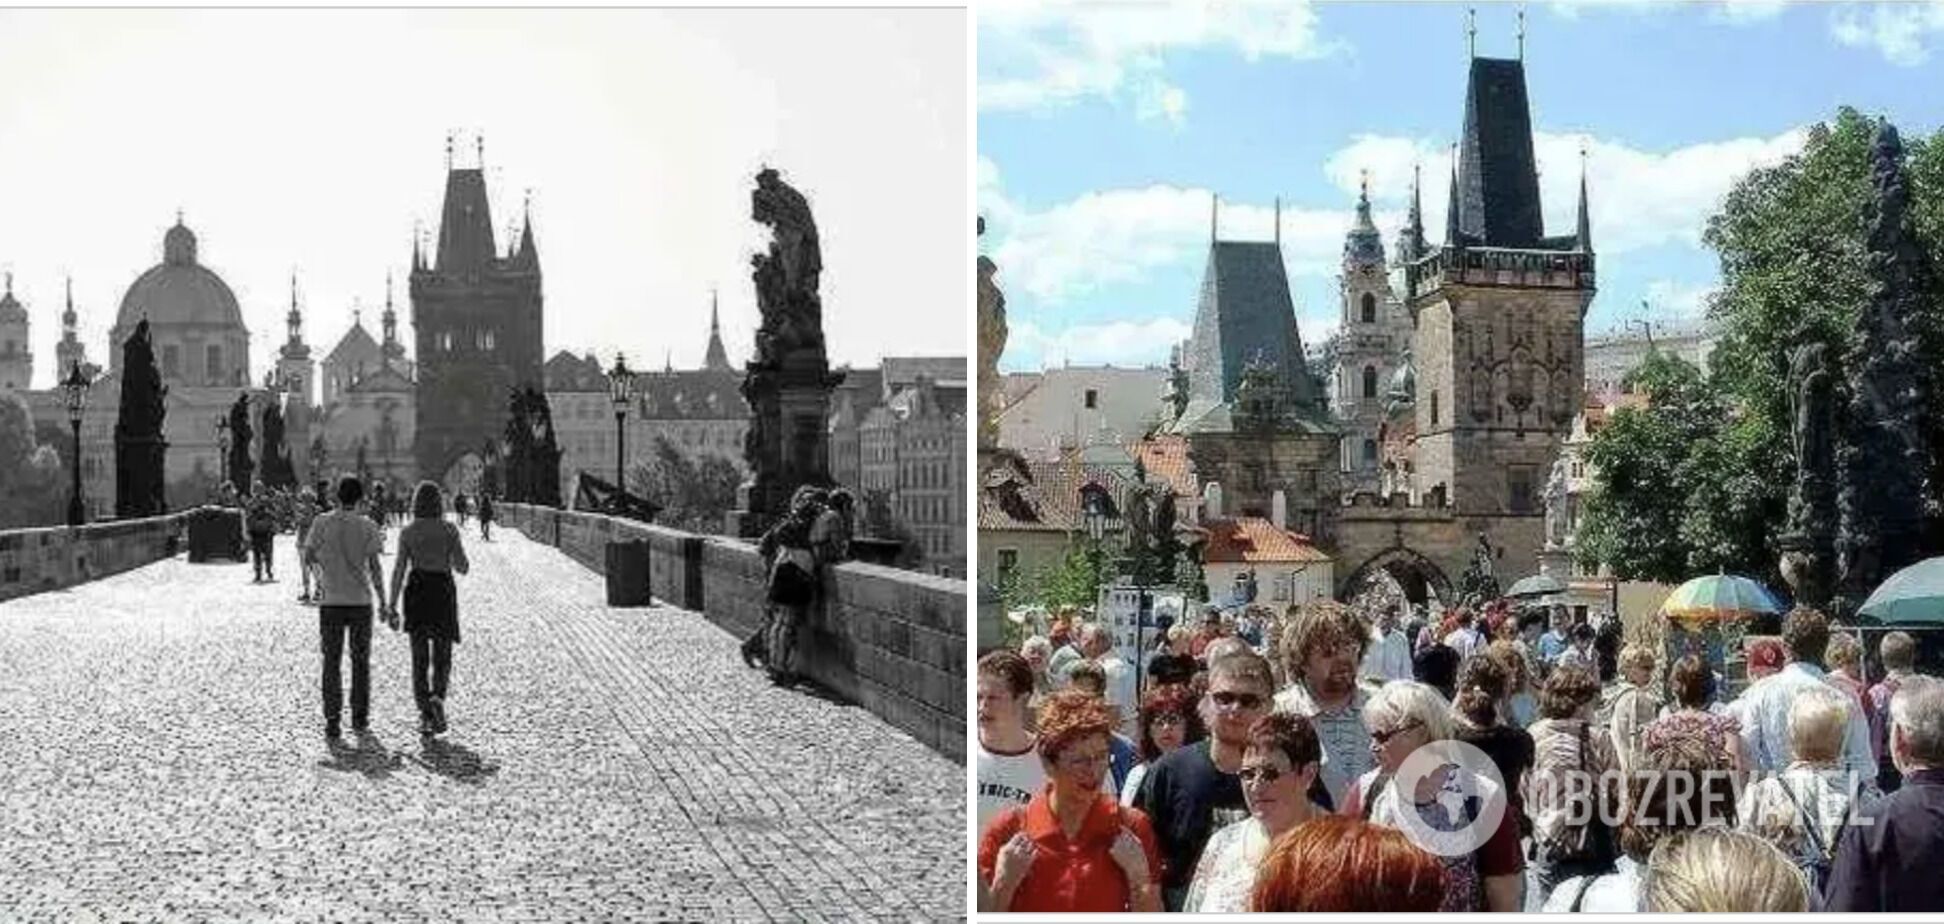 Charles Bridge is located in the very center of Prague